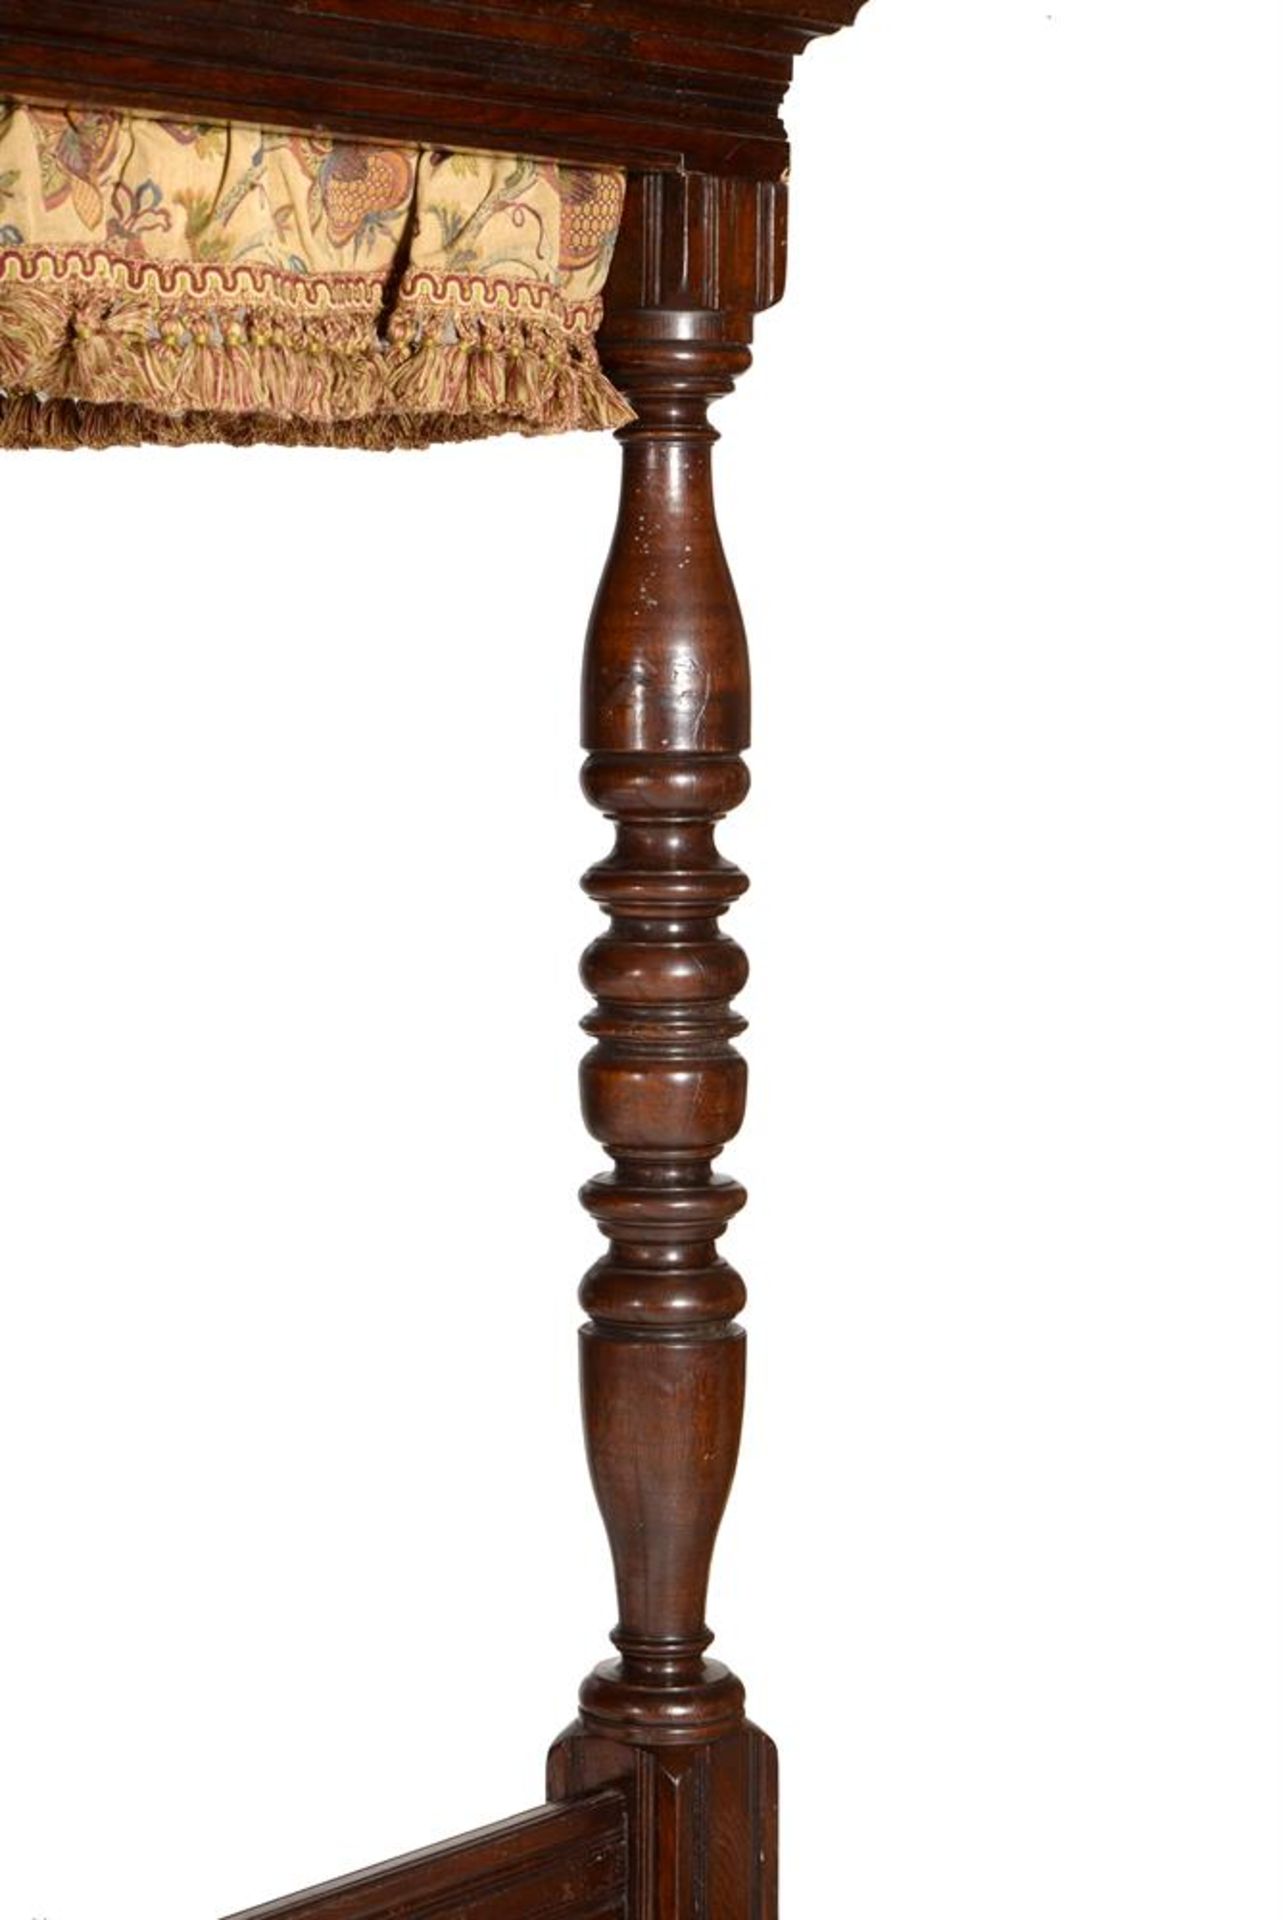 AN OAK FOUR POST BED, IN THE STUART MANNER, COMPLETE WITH HANGINGS, IN 17TH CENTURY STYLE - Image 6 of 9